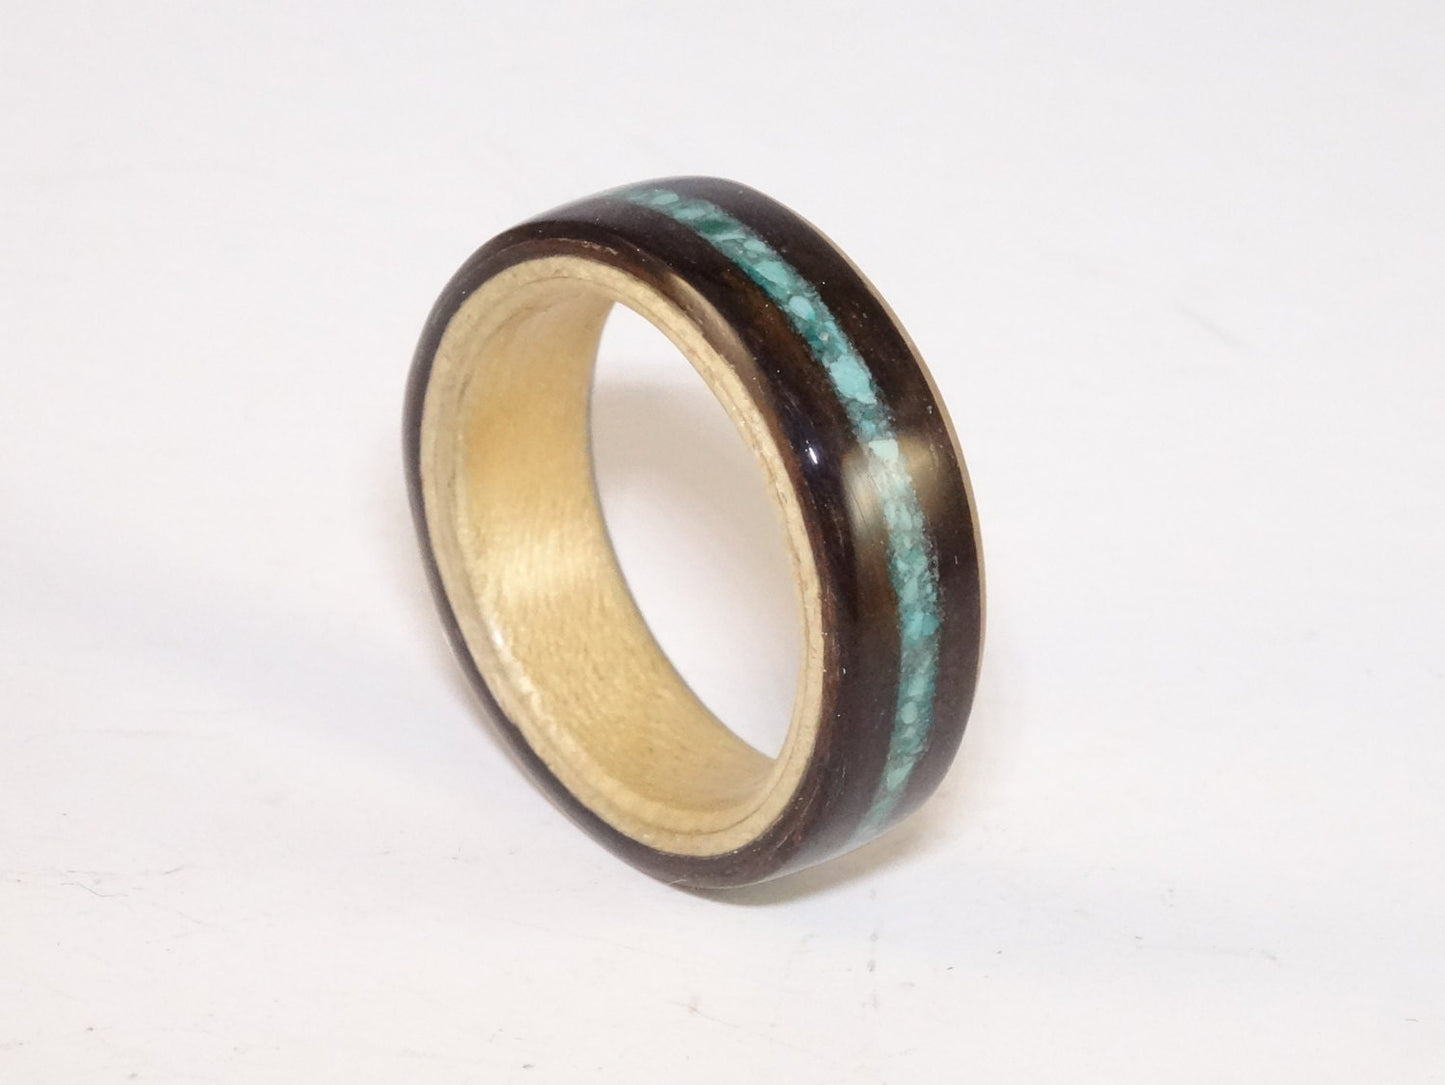 Macassar Ebony with Sycamore and Turquoise Bent Wood Ring